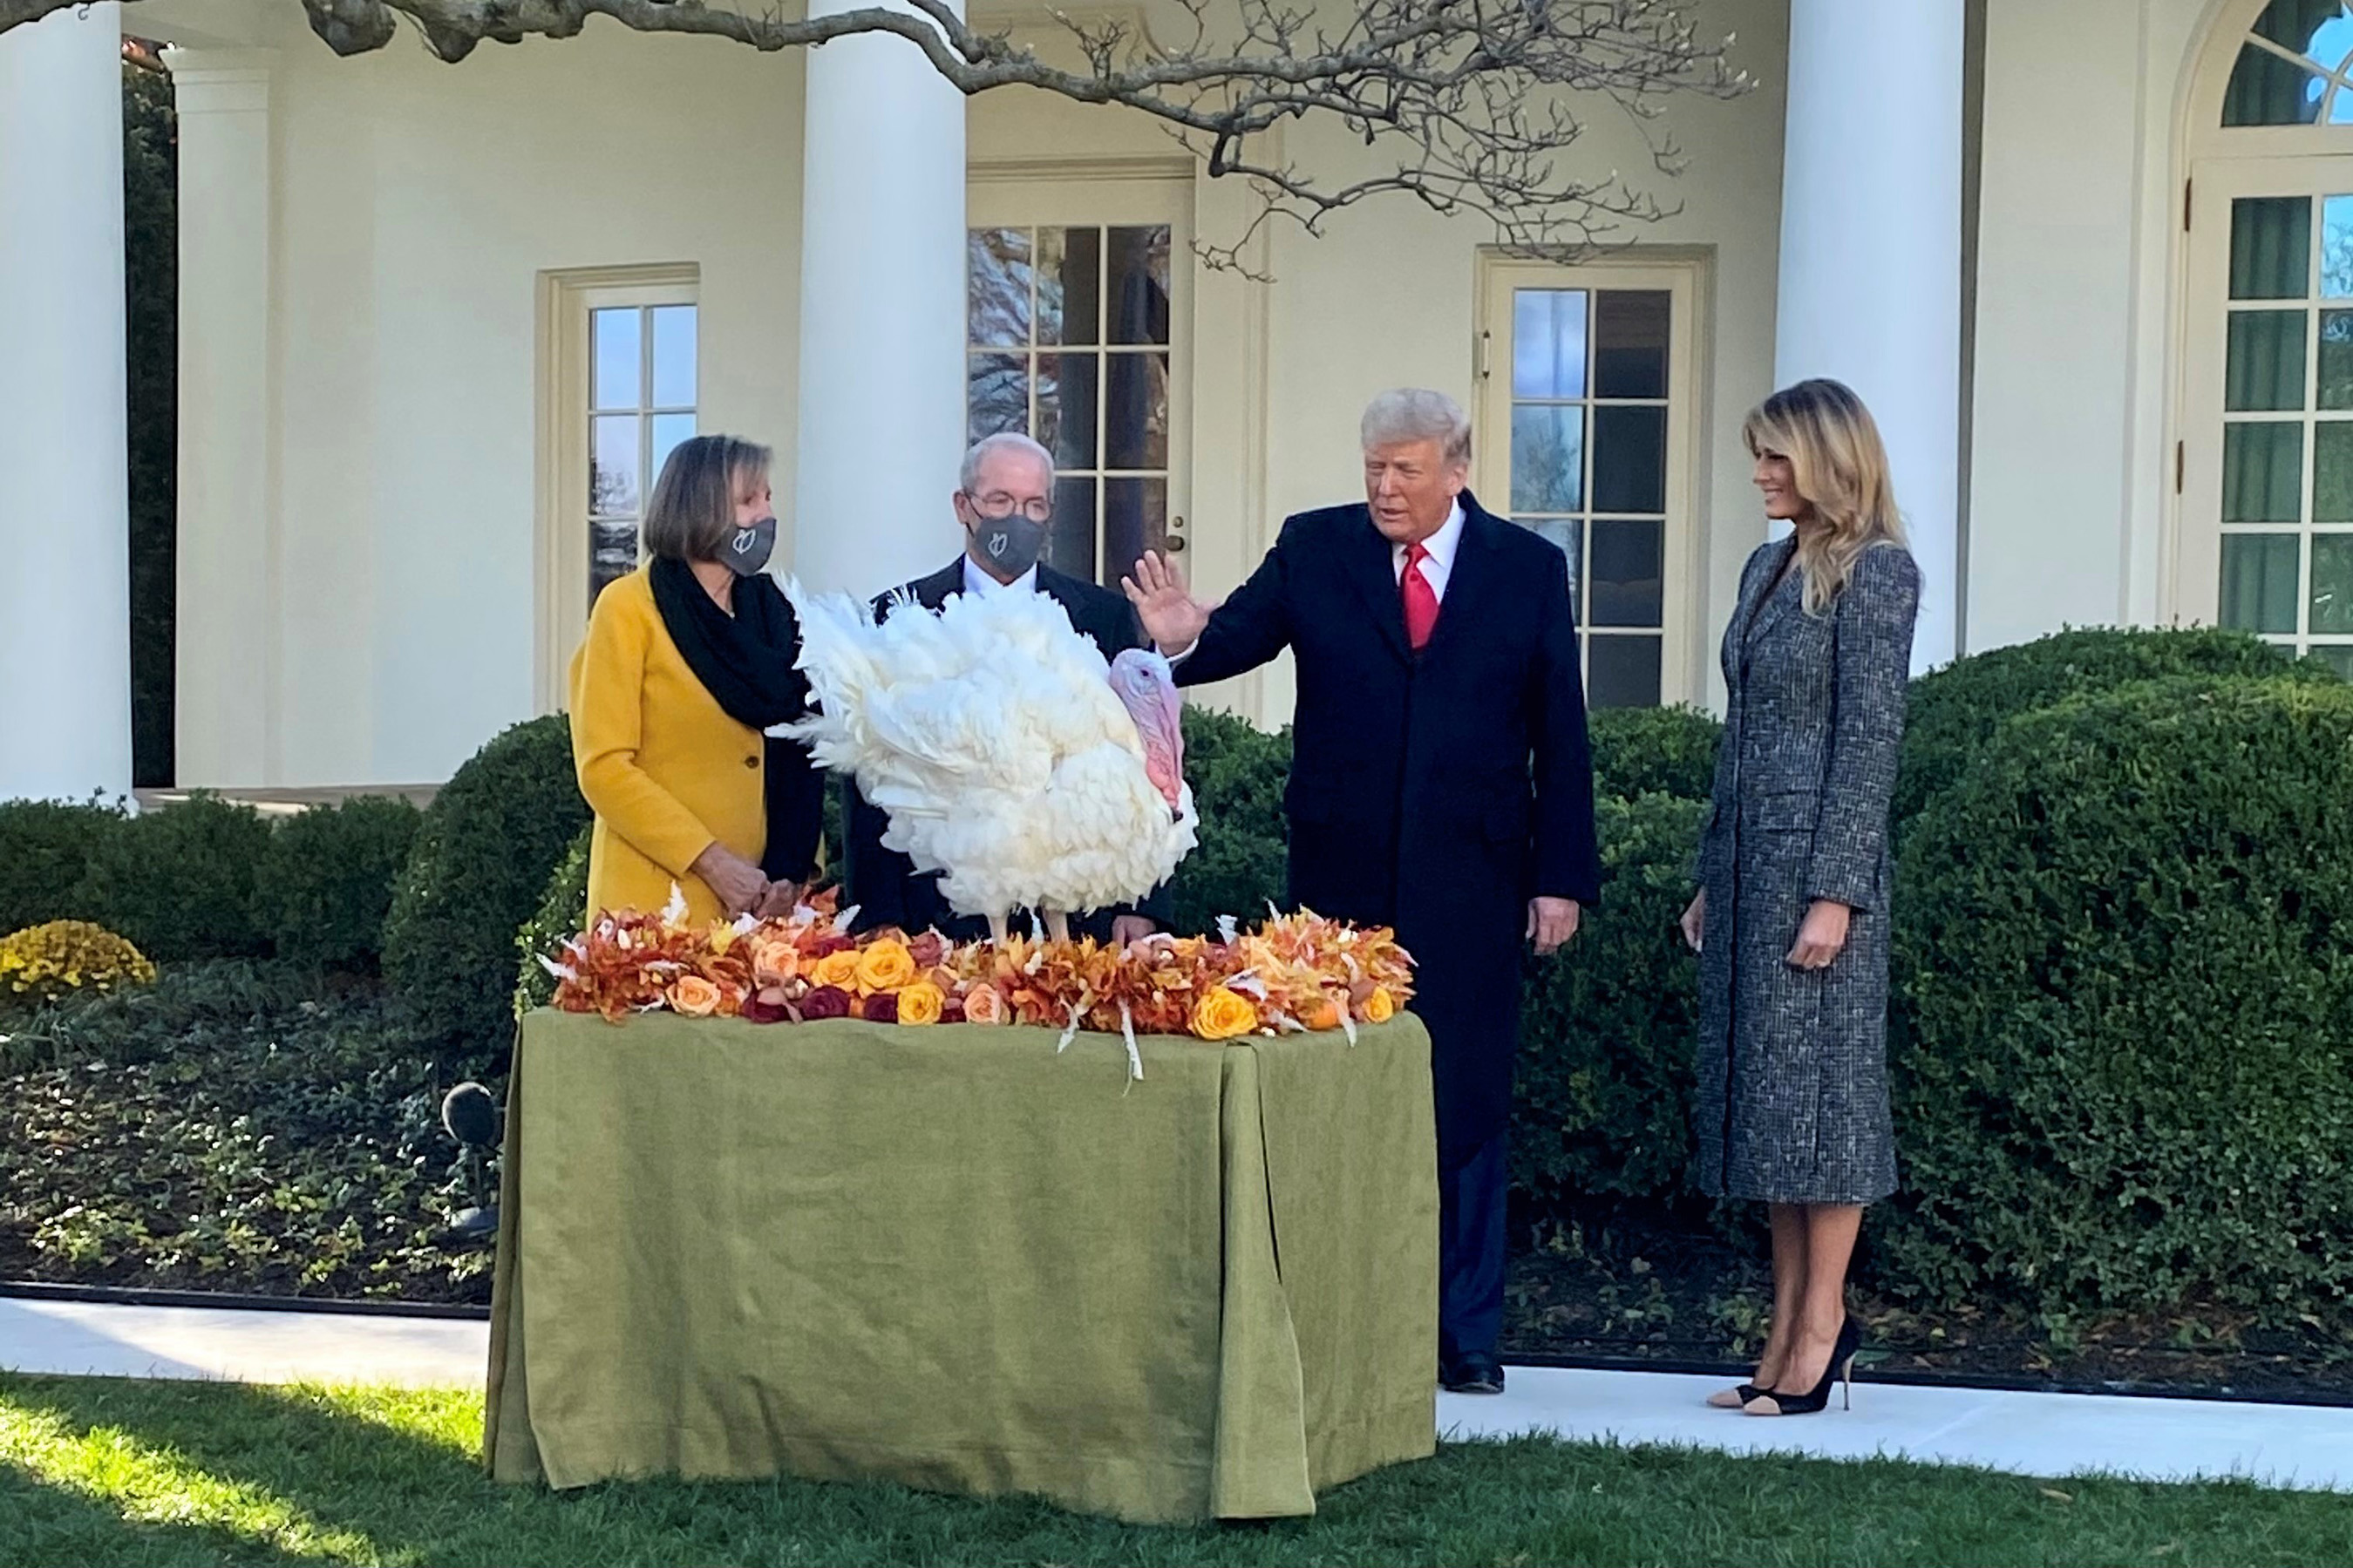 NTF Chairman Ron Kardel, his wife, Susie, and the First Lady look on as Corn is officially pardoned by President Trump.